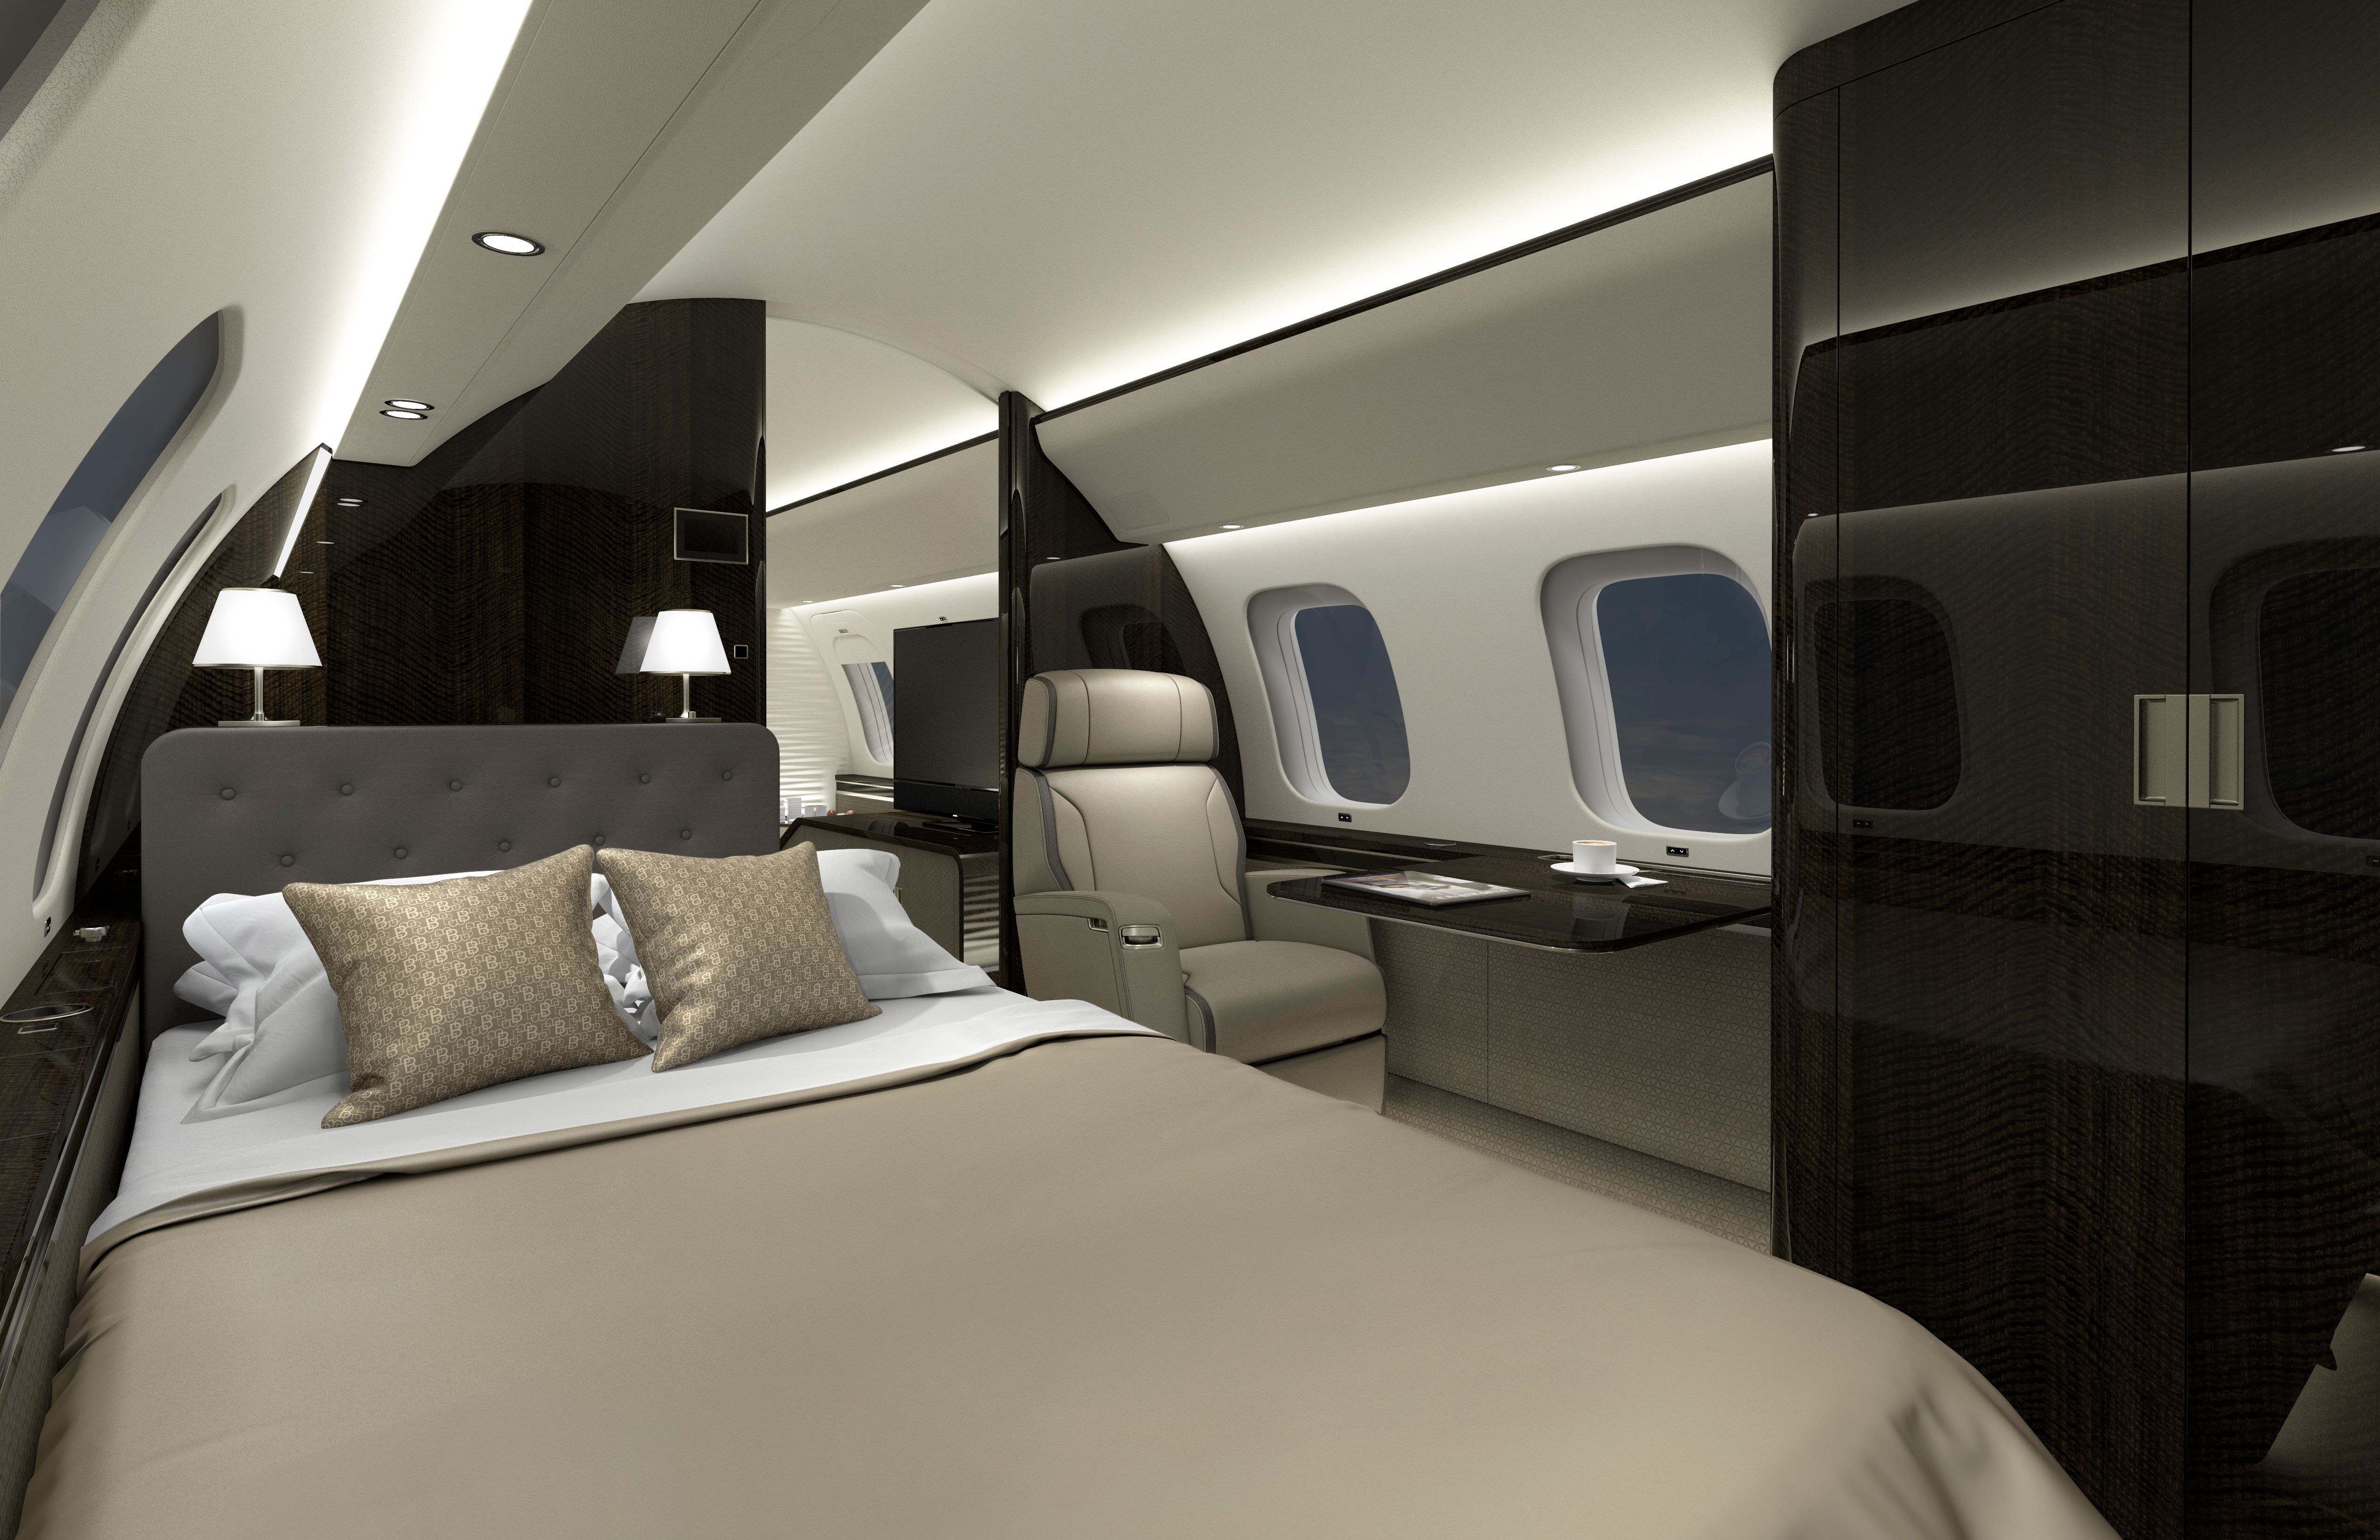 A Bedroom inside the Bombardier Global 8000.